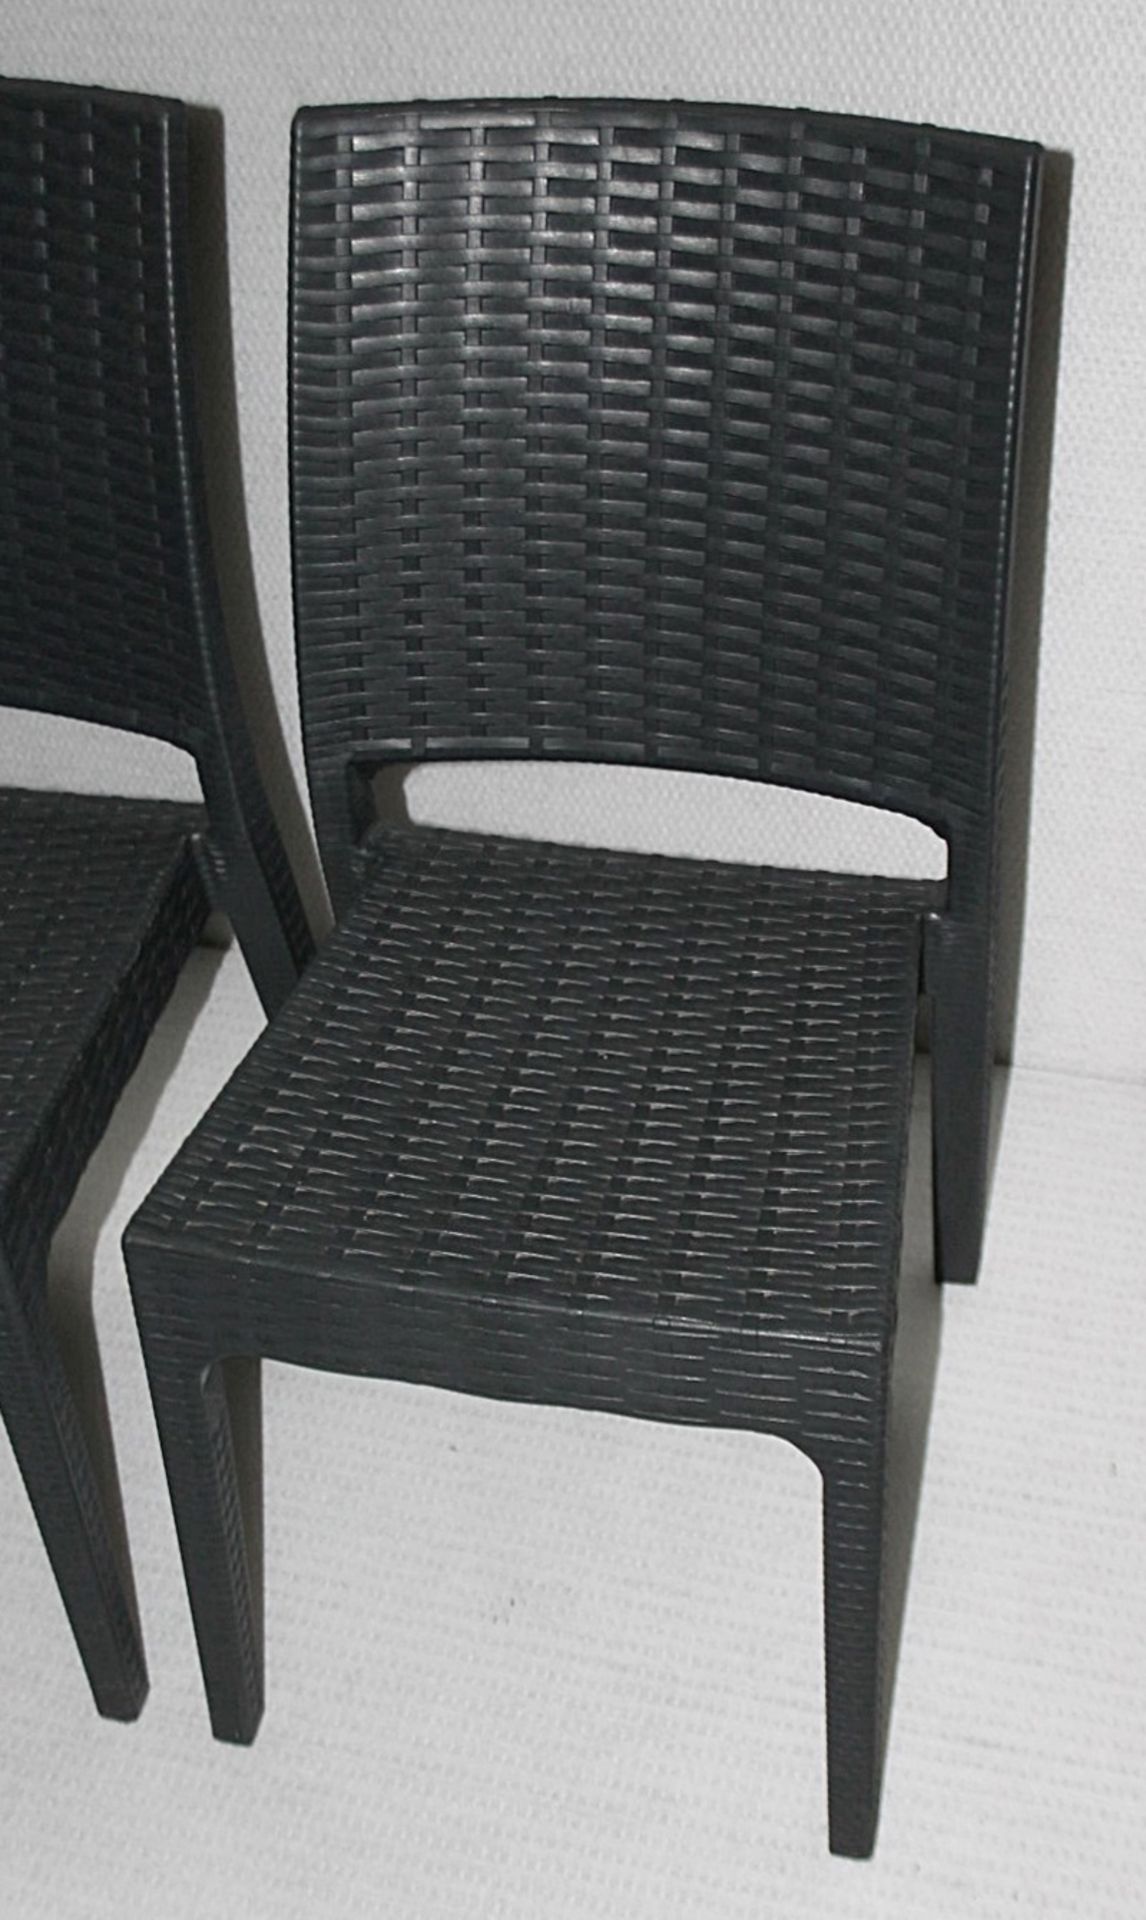 8 x SIESTA EXCLUSIVE 'Florida' Commercial Stackable Rattan-style Chairs In Dark Grey - Image 13 of 13